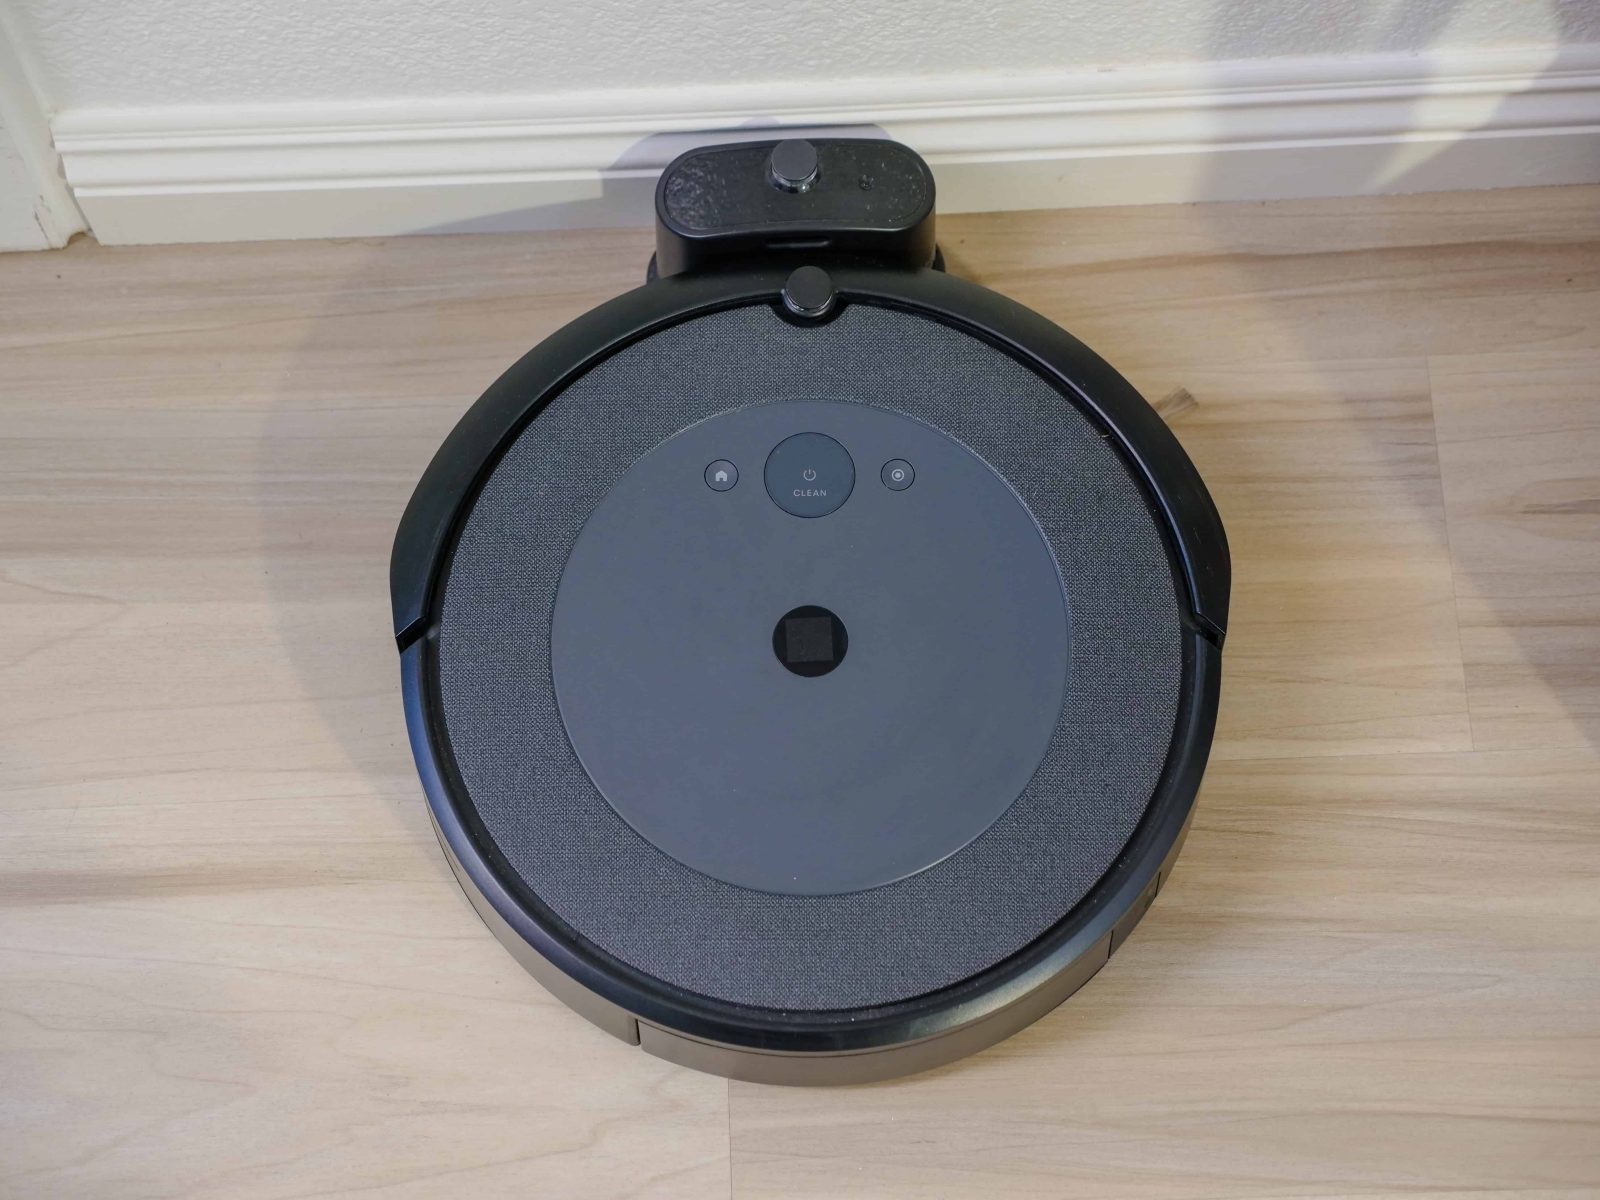 How To Connect Roomba To Your Wifi Network